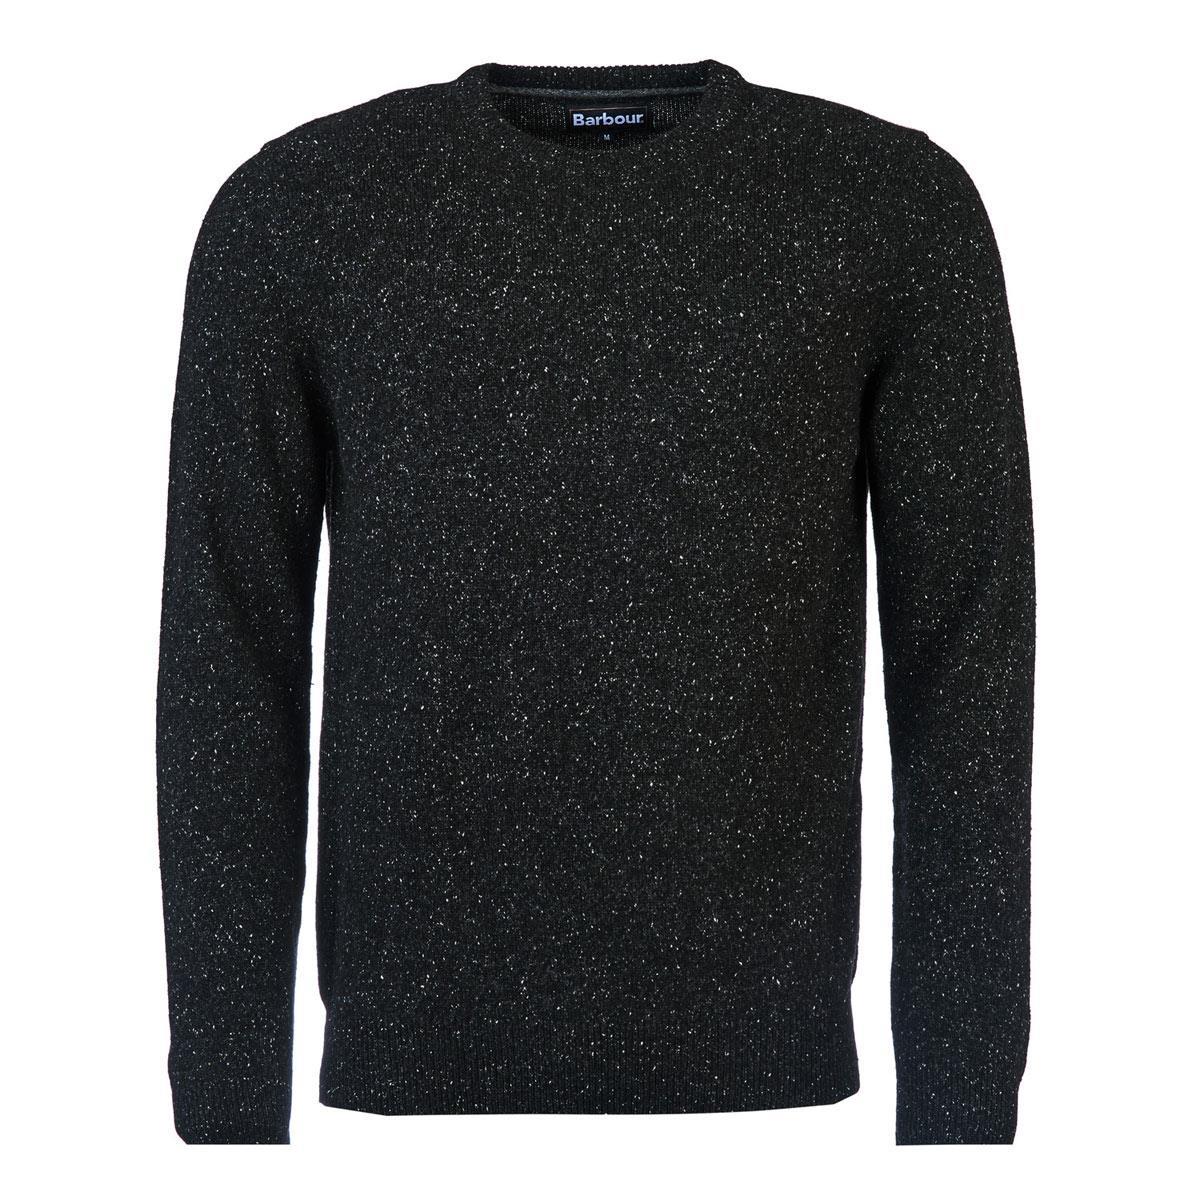 What's the makeup of the Barbour Tisbury Crew Neck Sweater?